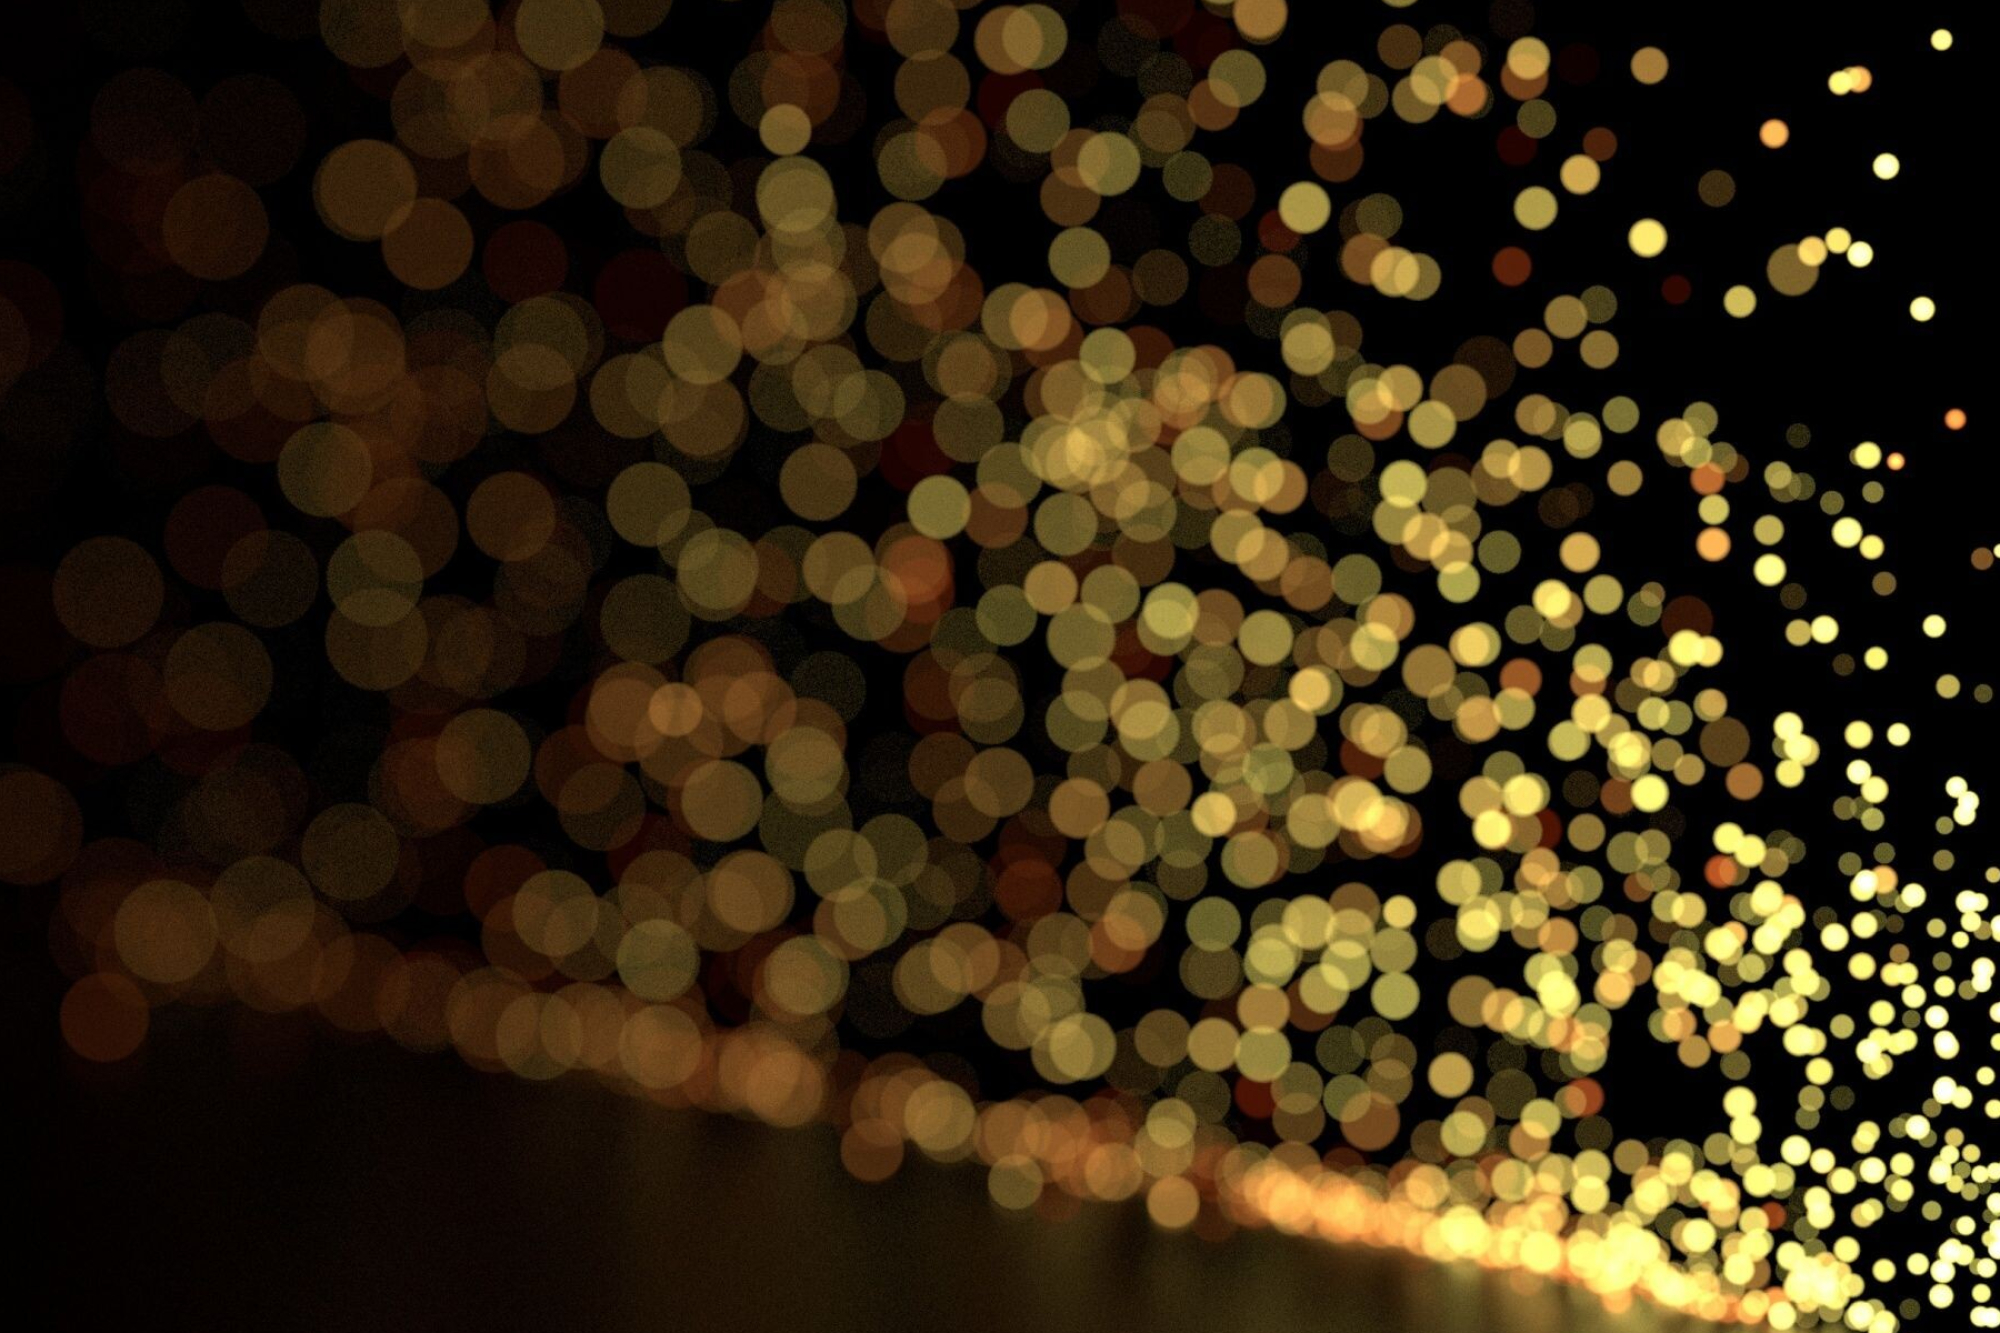 Gold Dots: Sparkling golden bubbles, Out-of-focus blurred lights, Abstract gold light, Scattered illumination. 2000x1340 HD Wallpaper.